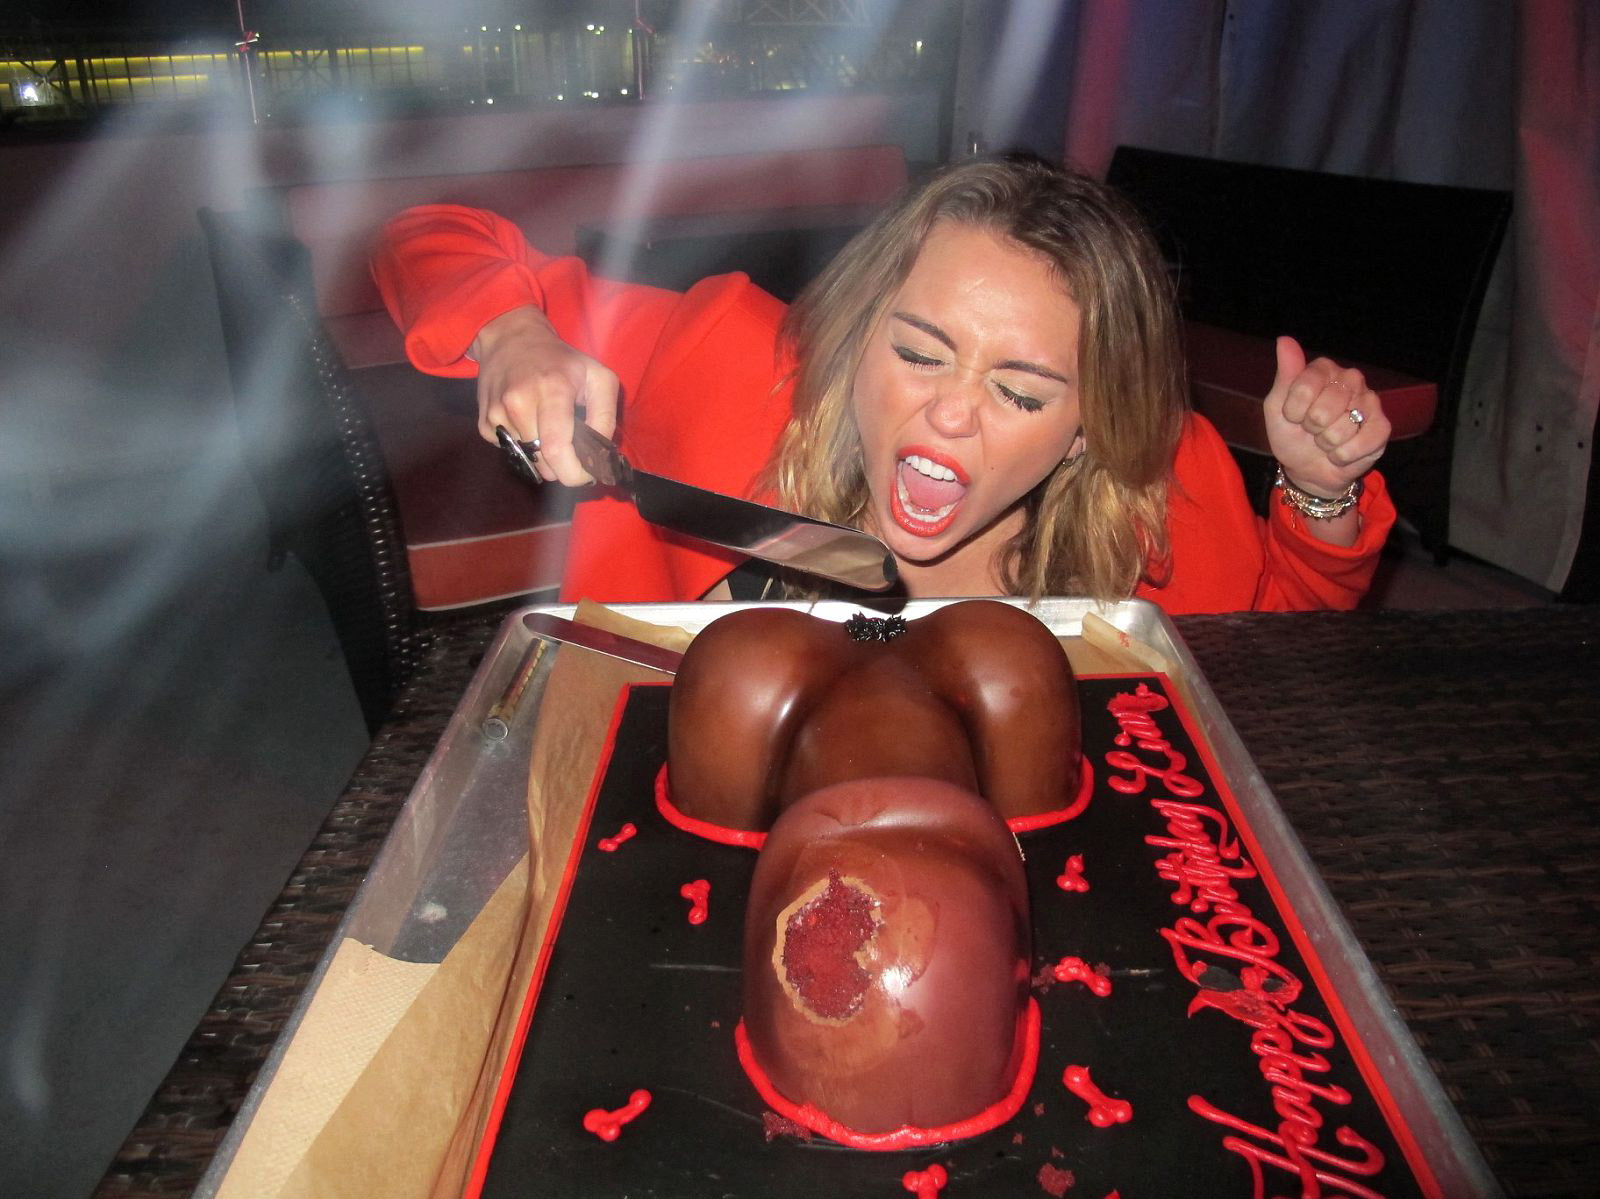 Miley Cyrus licking a huge cock-shaped cake at her birthday party in LA #75275179